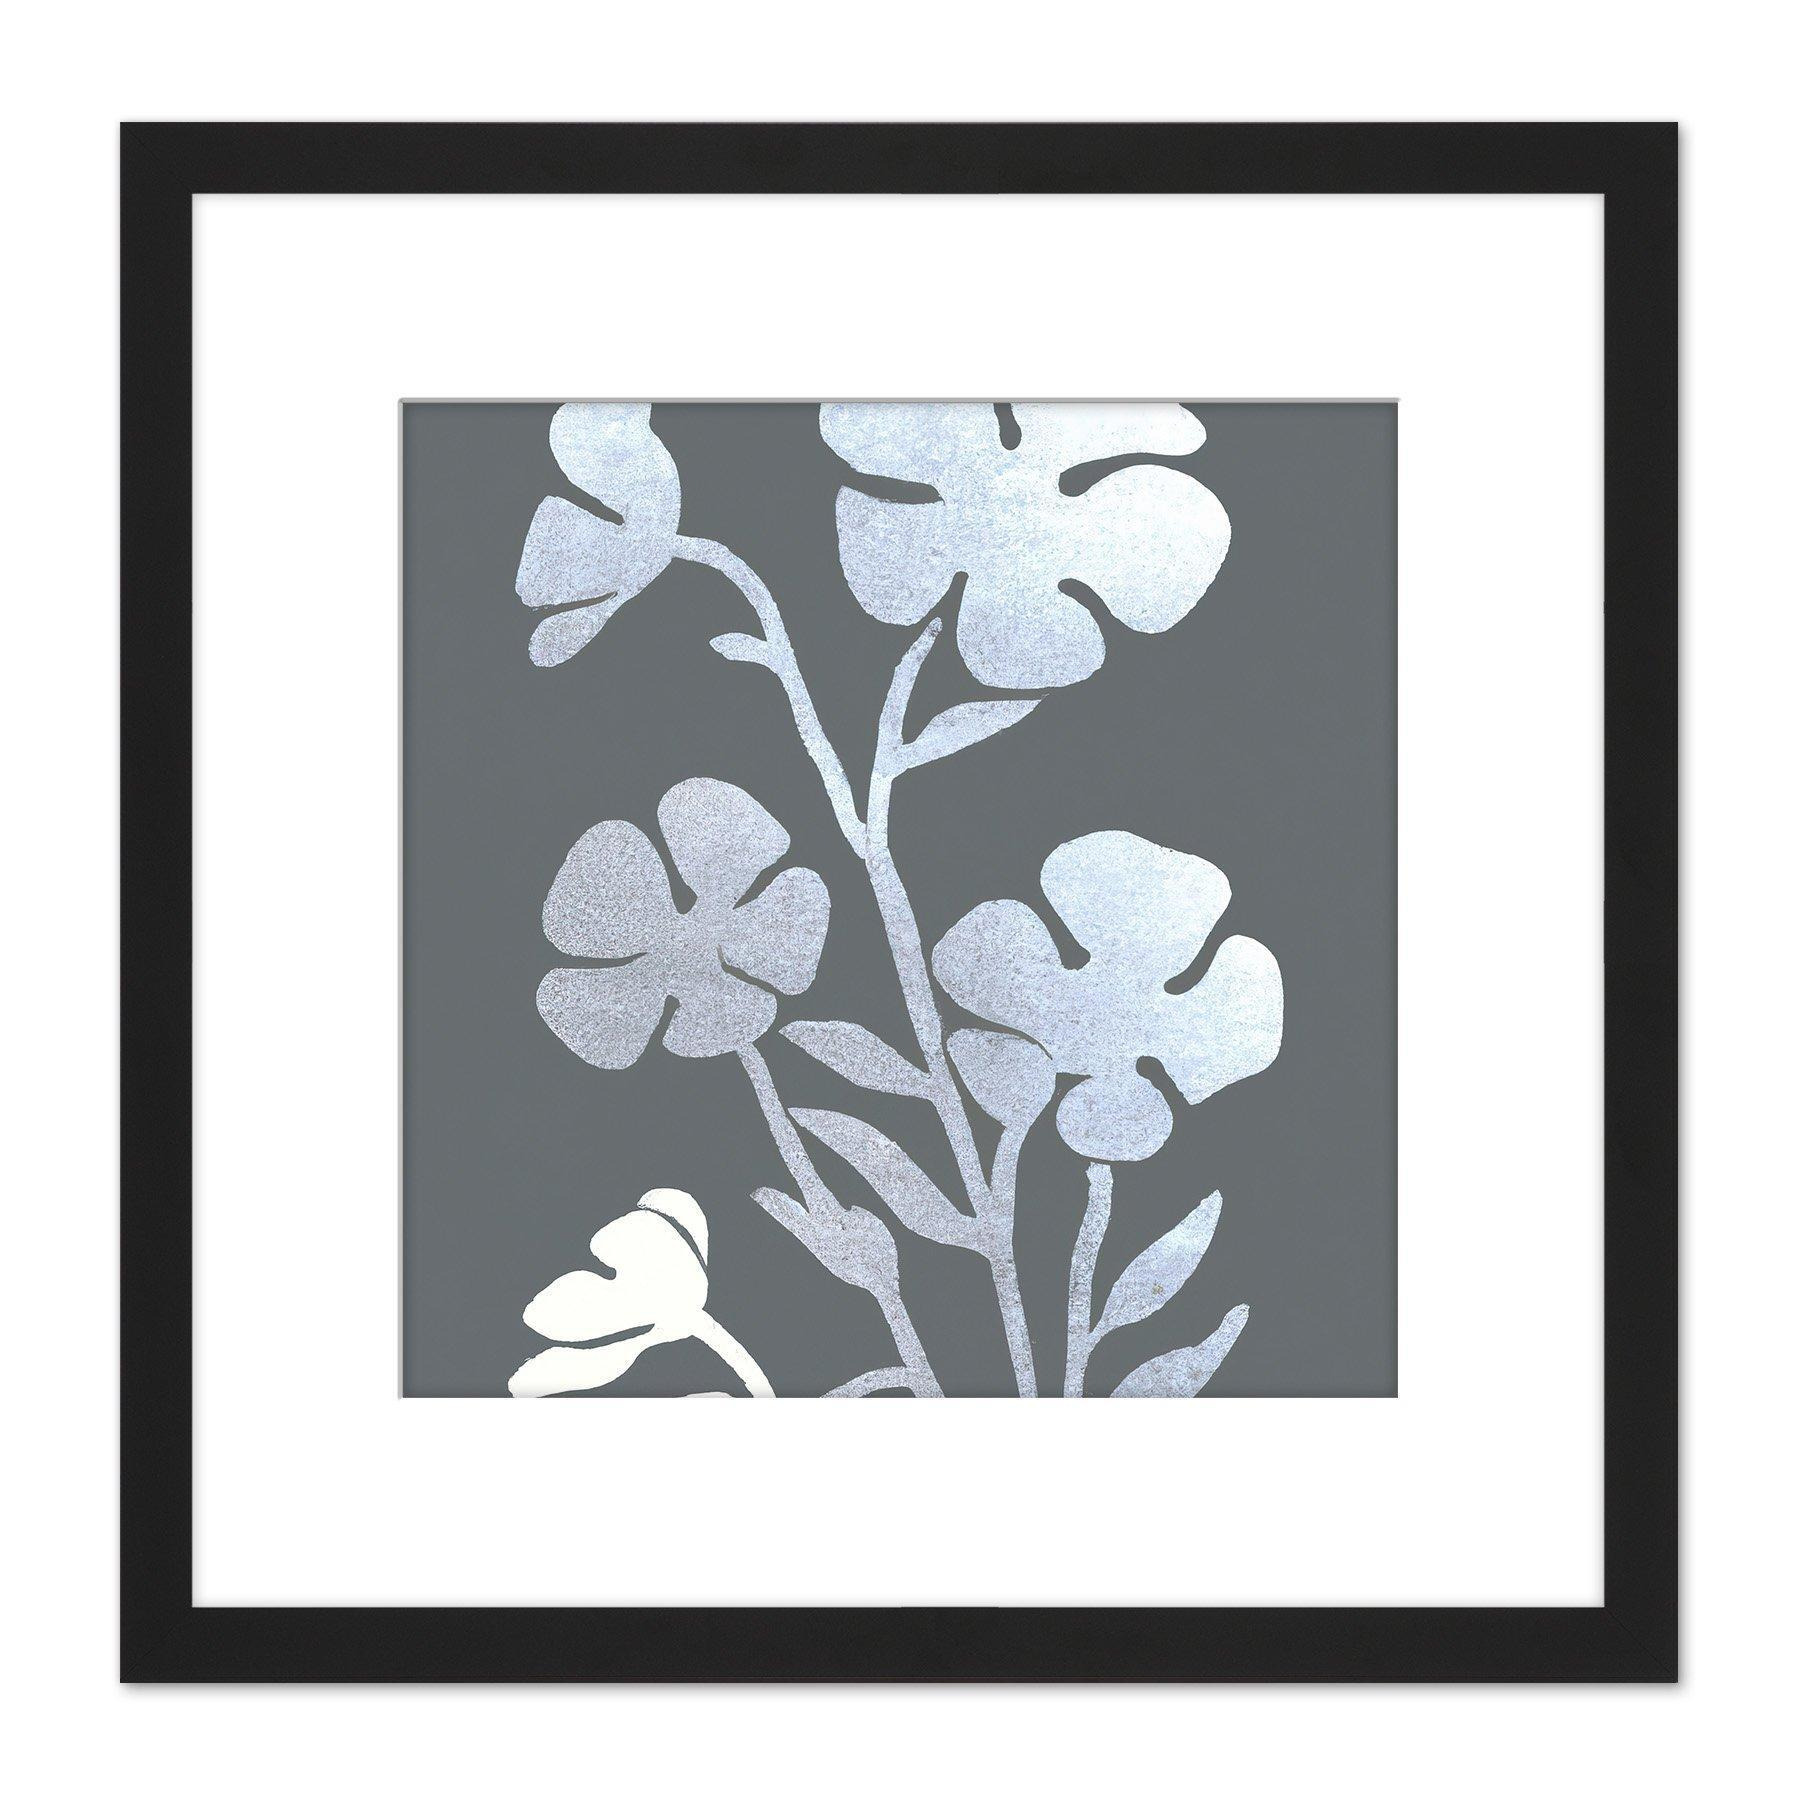 Silver Foil Metallic Foil Style on Grey Pressed Flowers Floral Painting Square Wooden Framed Wall Art Print Picture 8X8 Inch - image 1